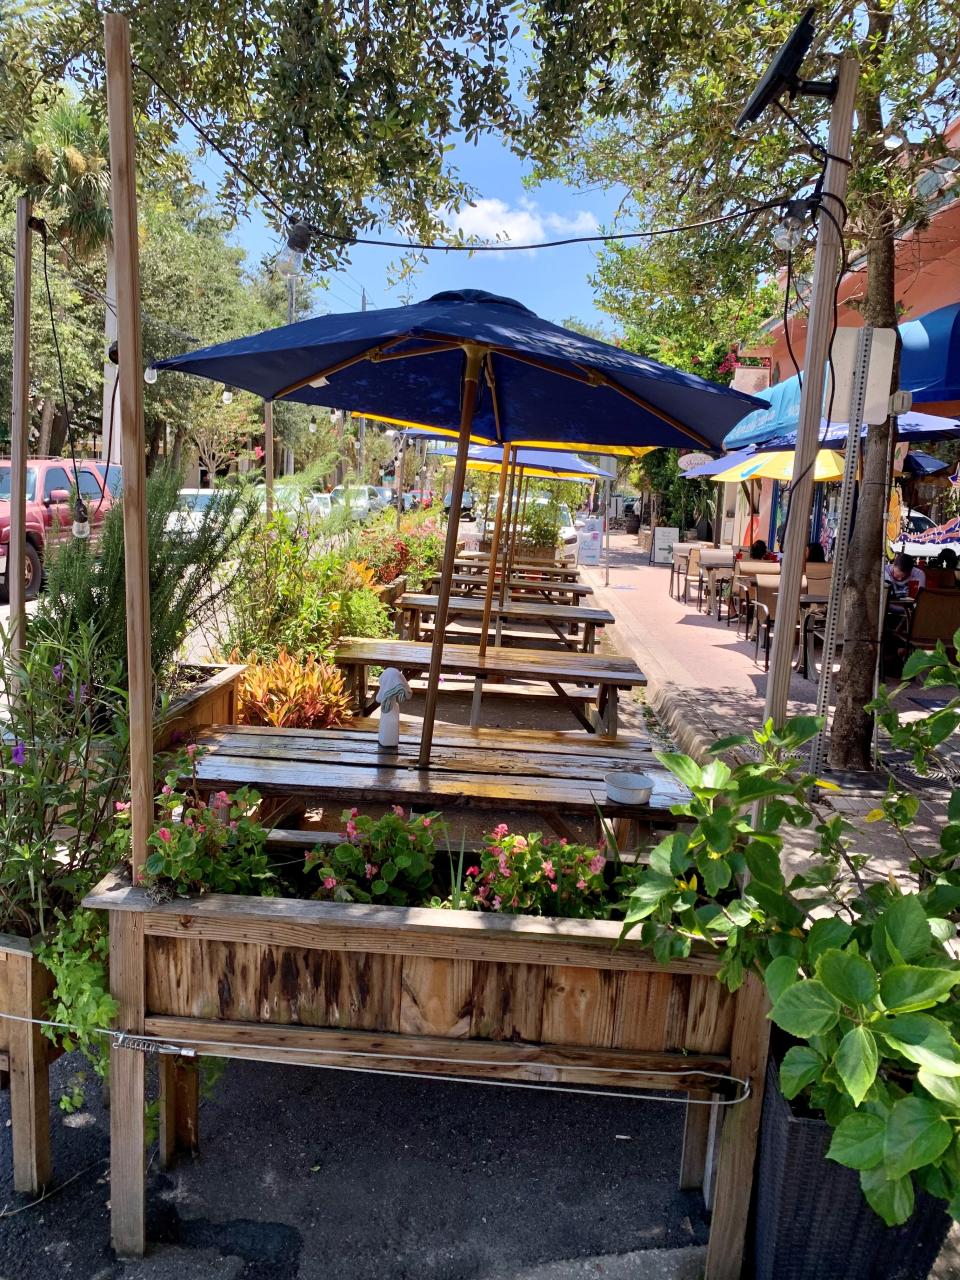 Pub Americana in Cocoa Village added extra outdoor seating during the pandemic. Now now it has become a leafy little patio where diners can munch salads, pasta dishes, pizzas and “shareables."